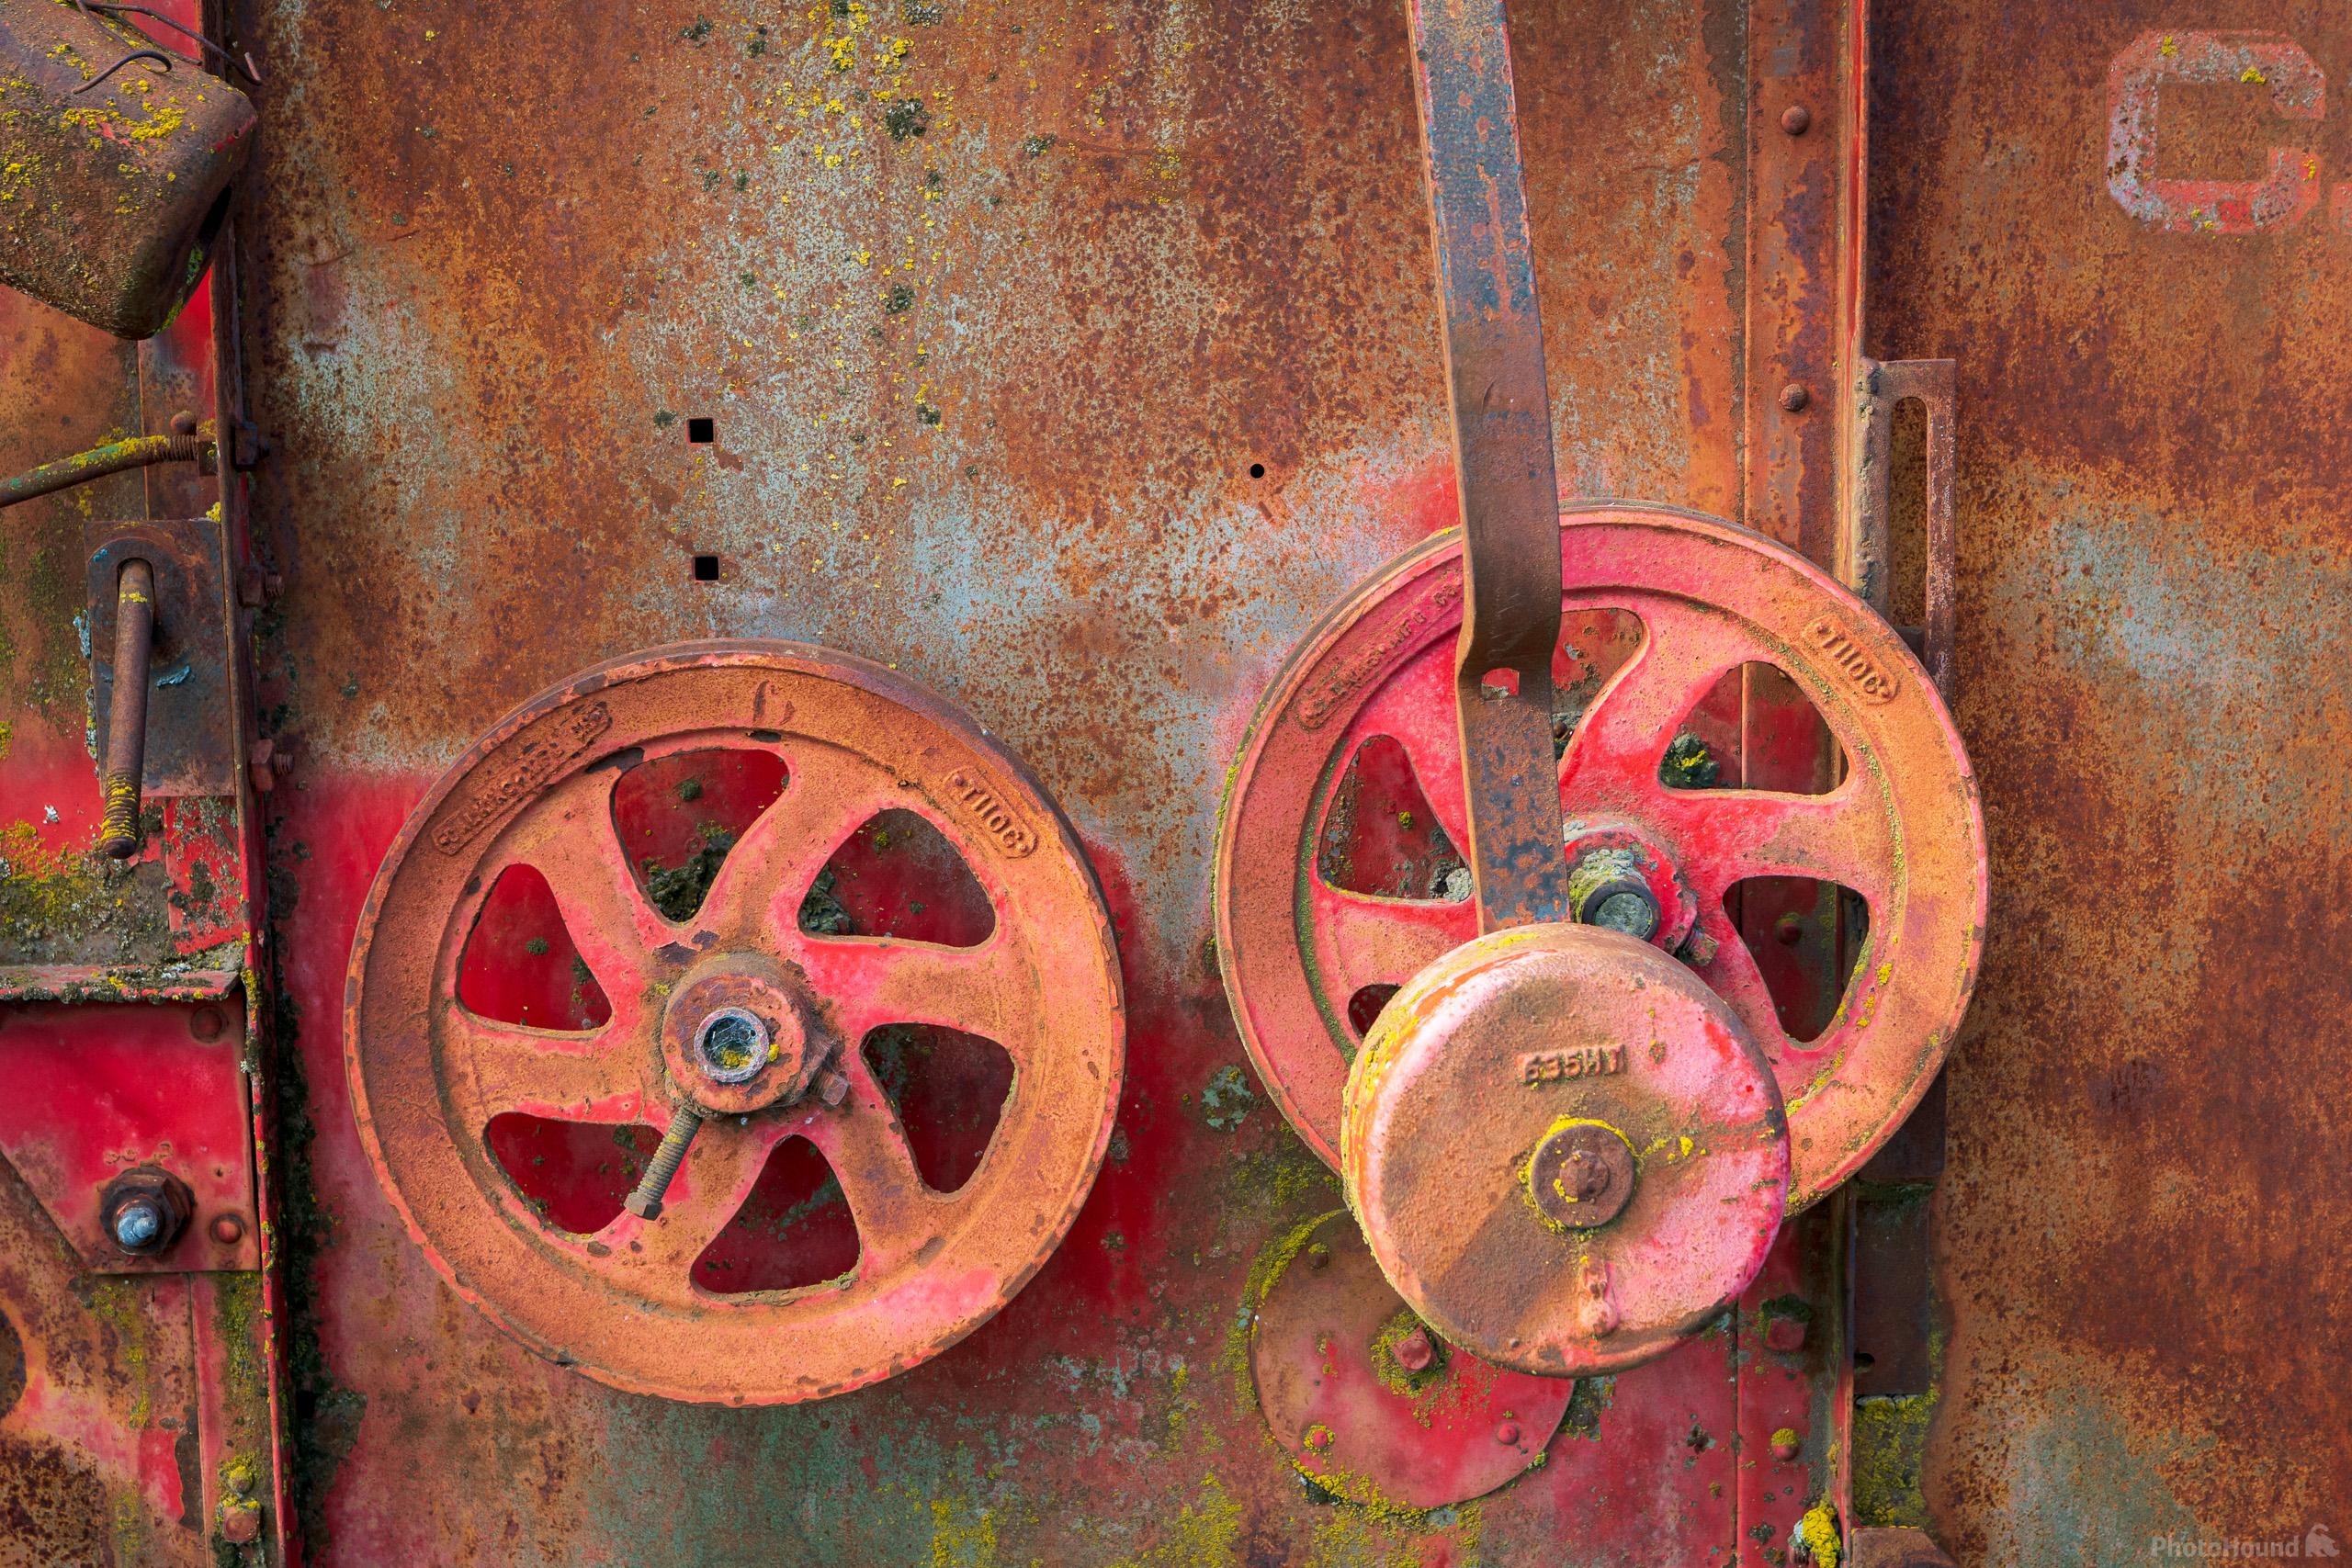 Image of Borgen Road Old Machinery by Joe Becker